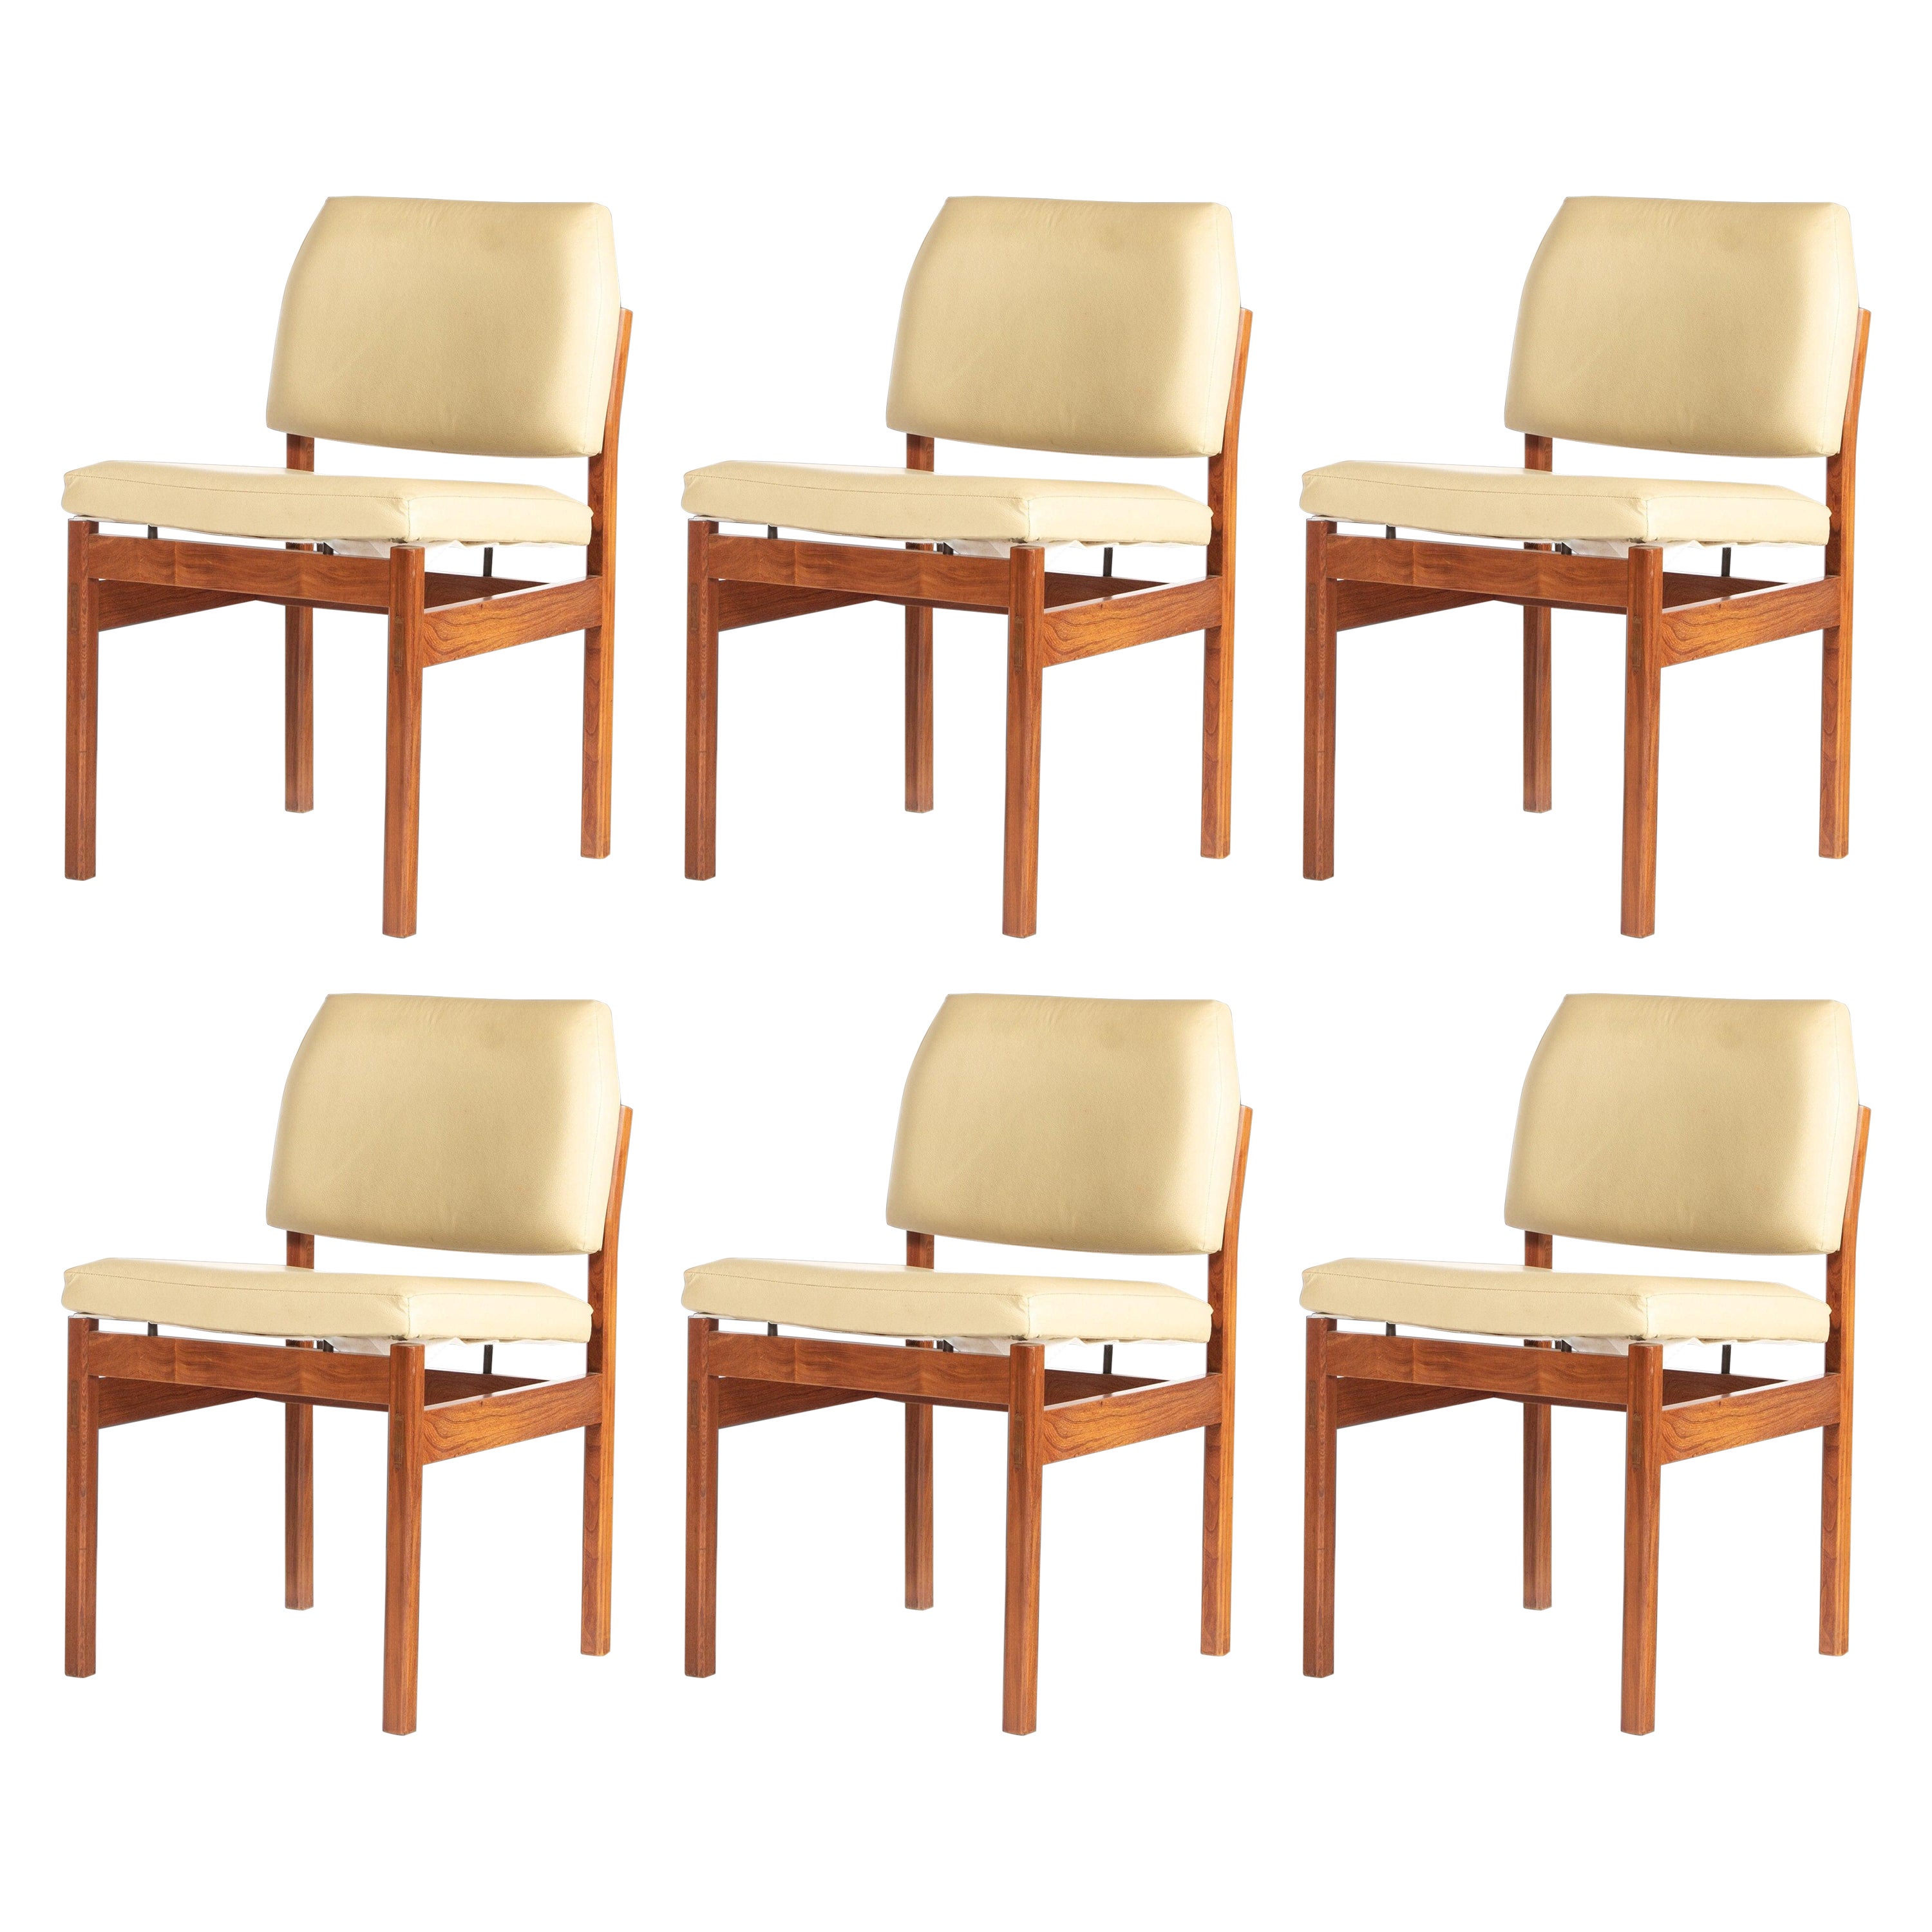 Set of Six (6) Walnut Dining Chairs in the Manner of Jens Risom, USA, c. 1960s For Sale